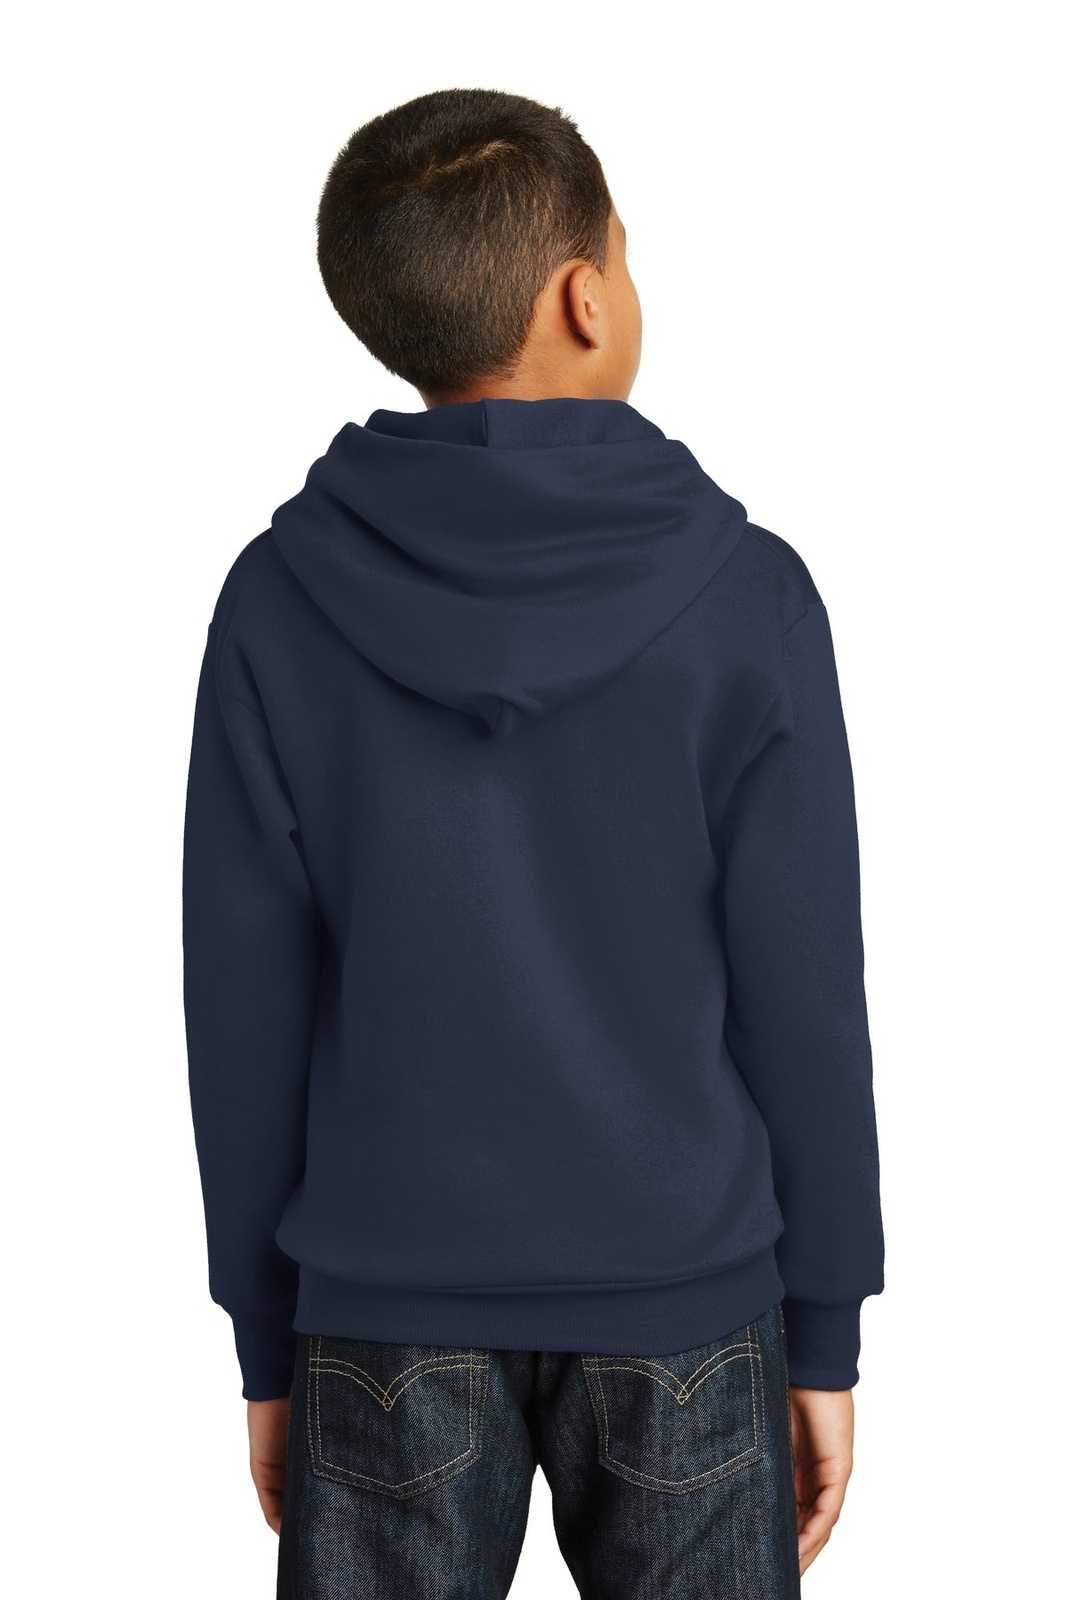 Hanes P470 Youth Ecosmart Pullover Hooded Sweatshirt - Navy - HIT a Double